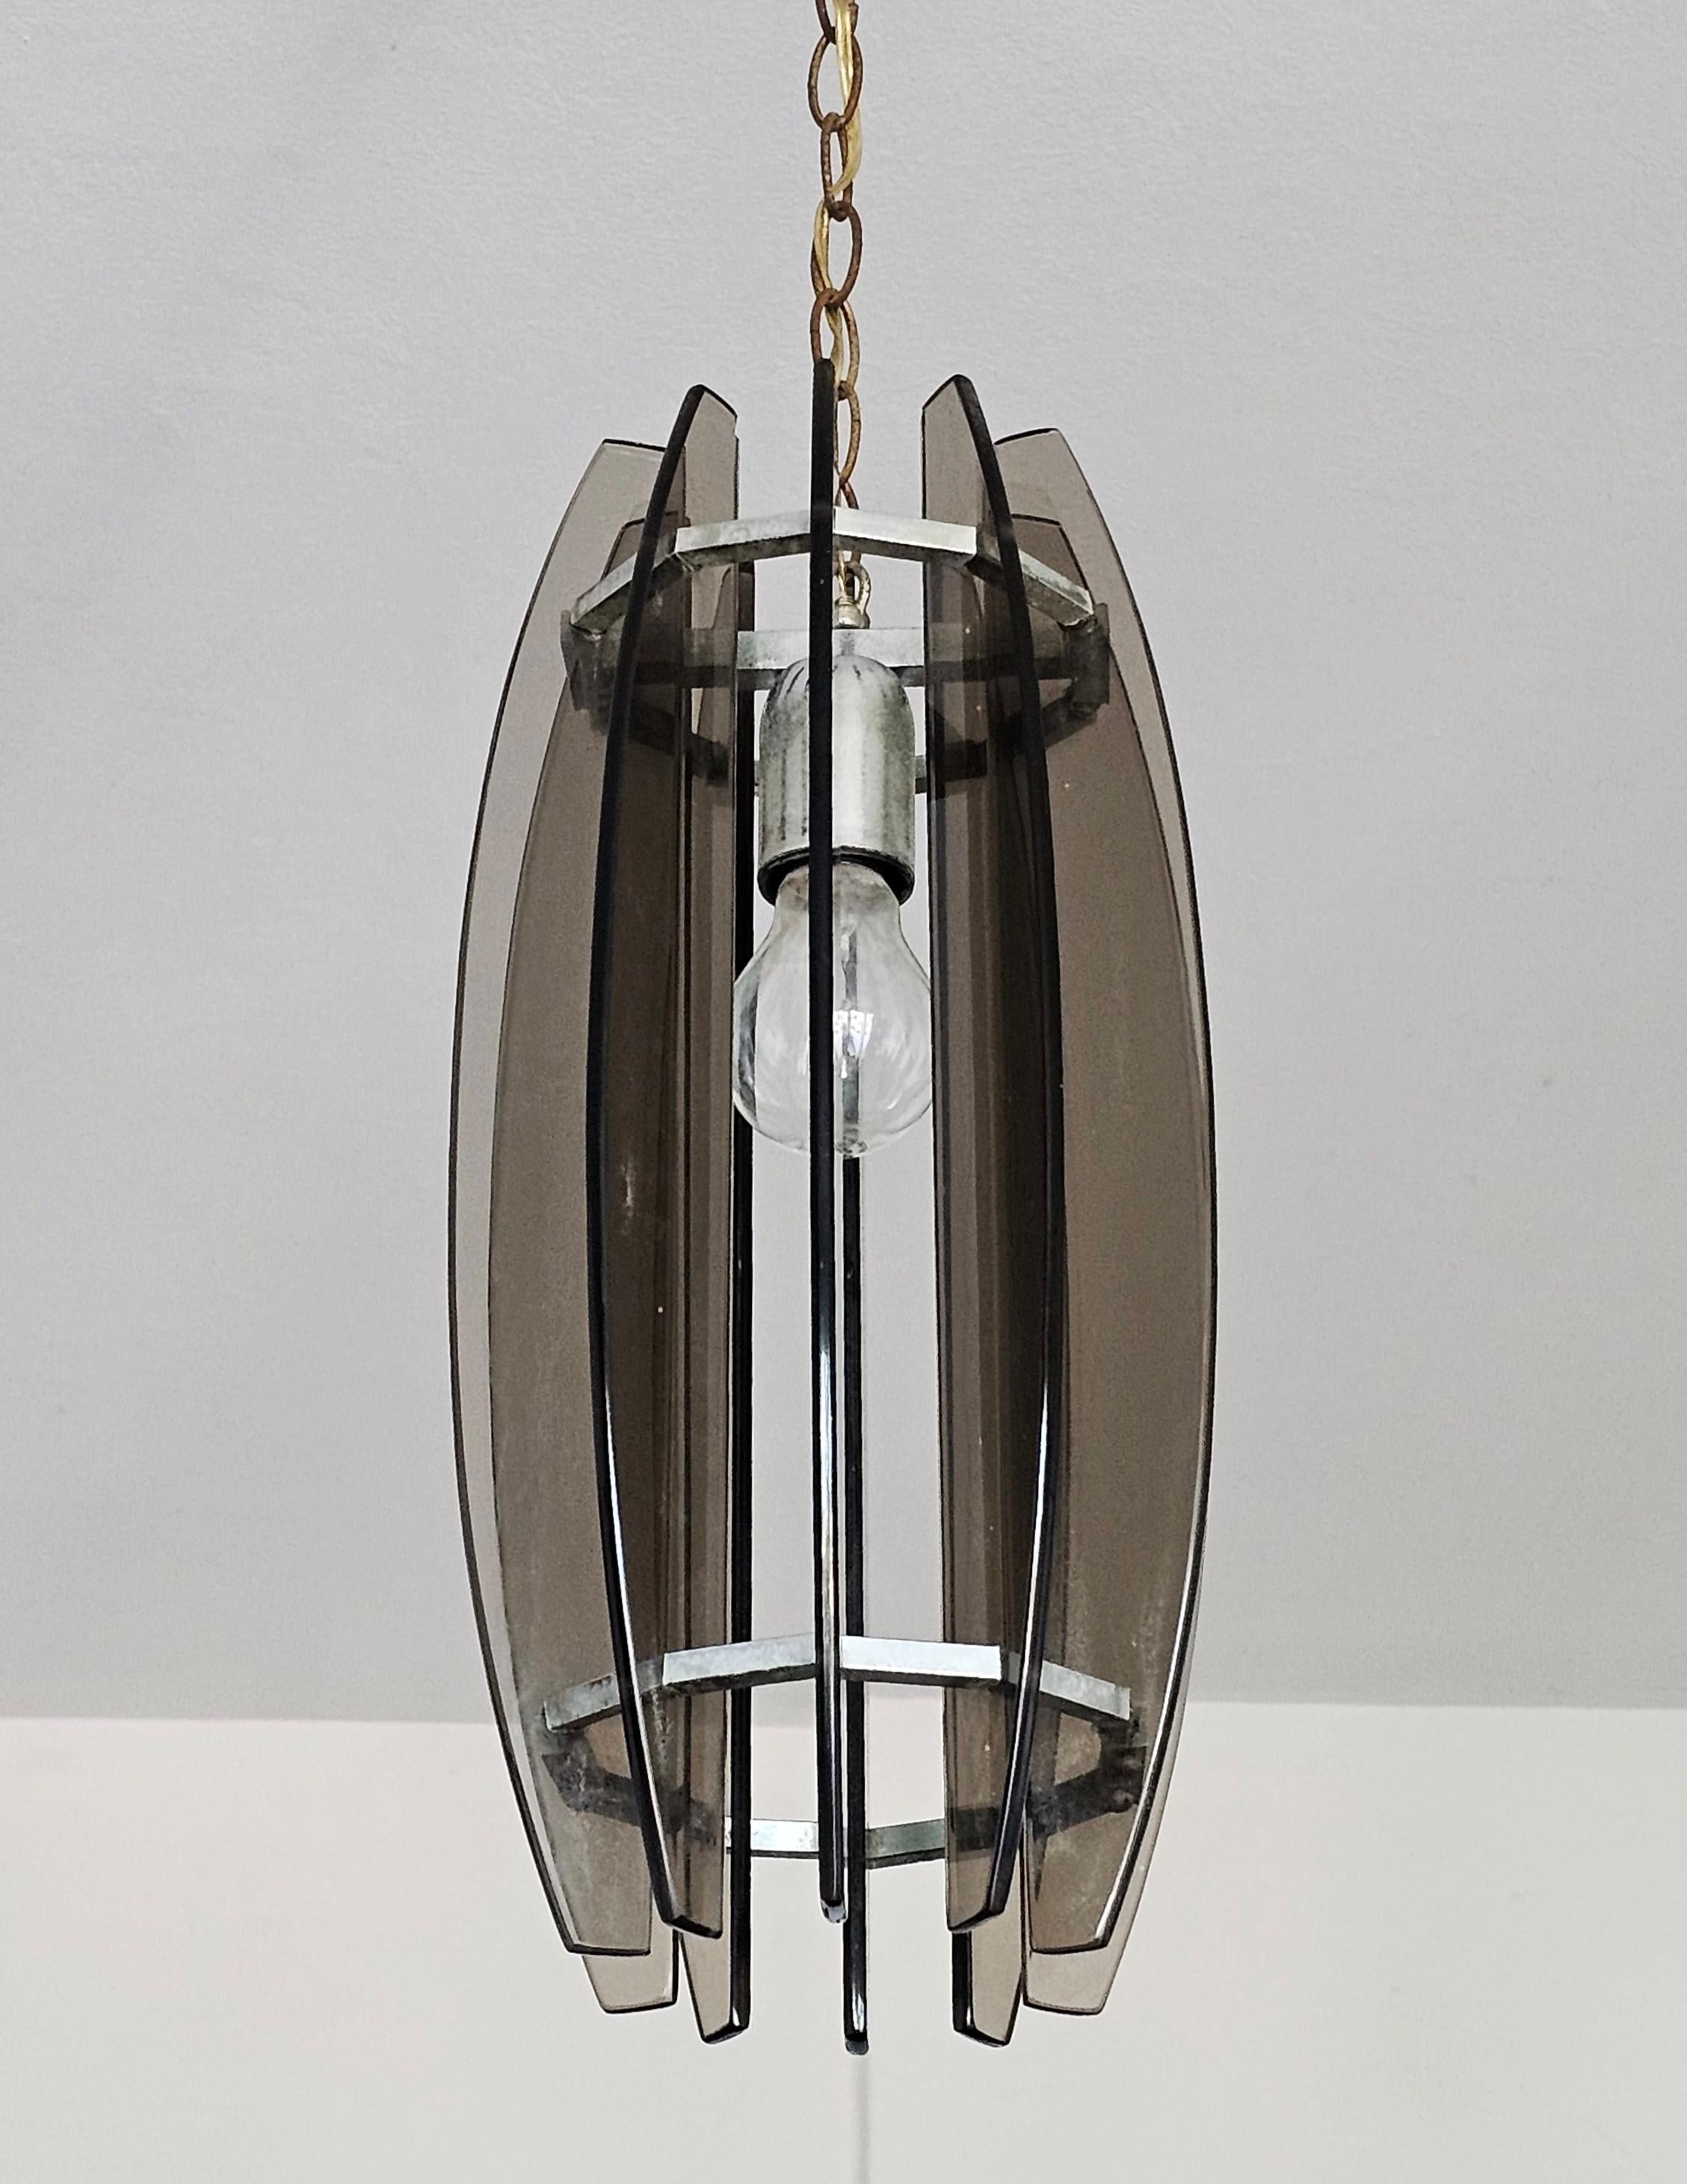 Italian Glass Pendant Light in Chrome and Smoked Glass in Fontana Arte style, Italy 1970 For Sale